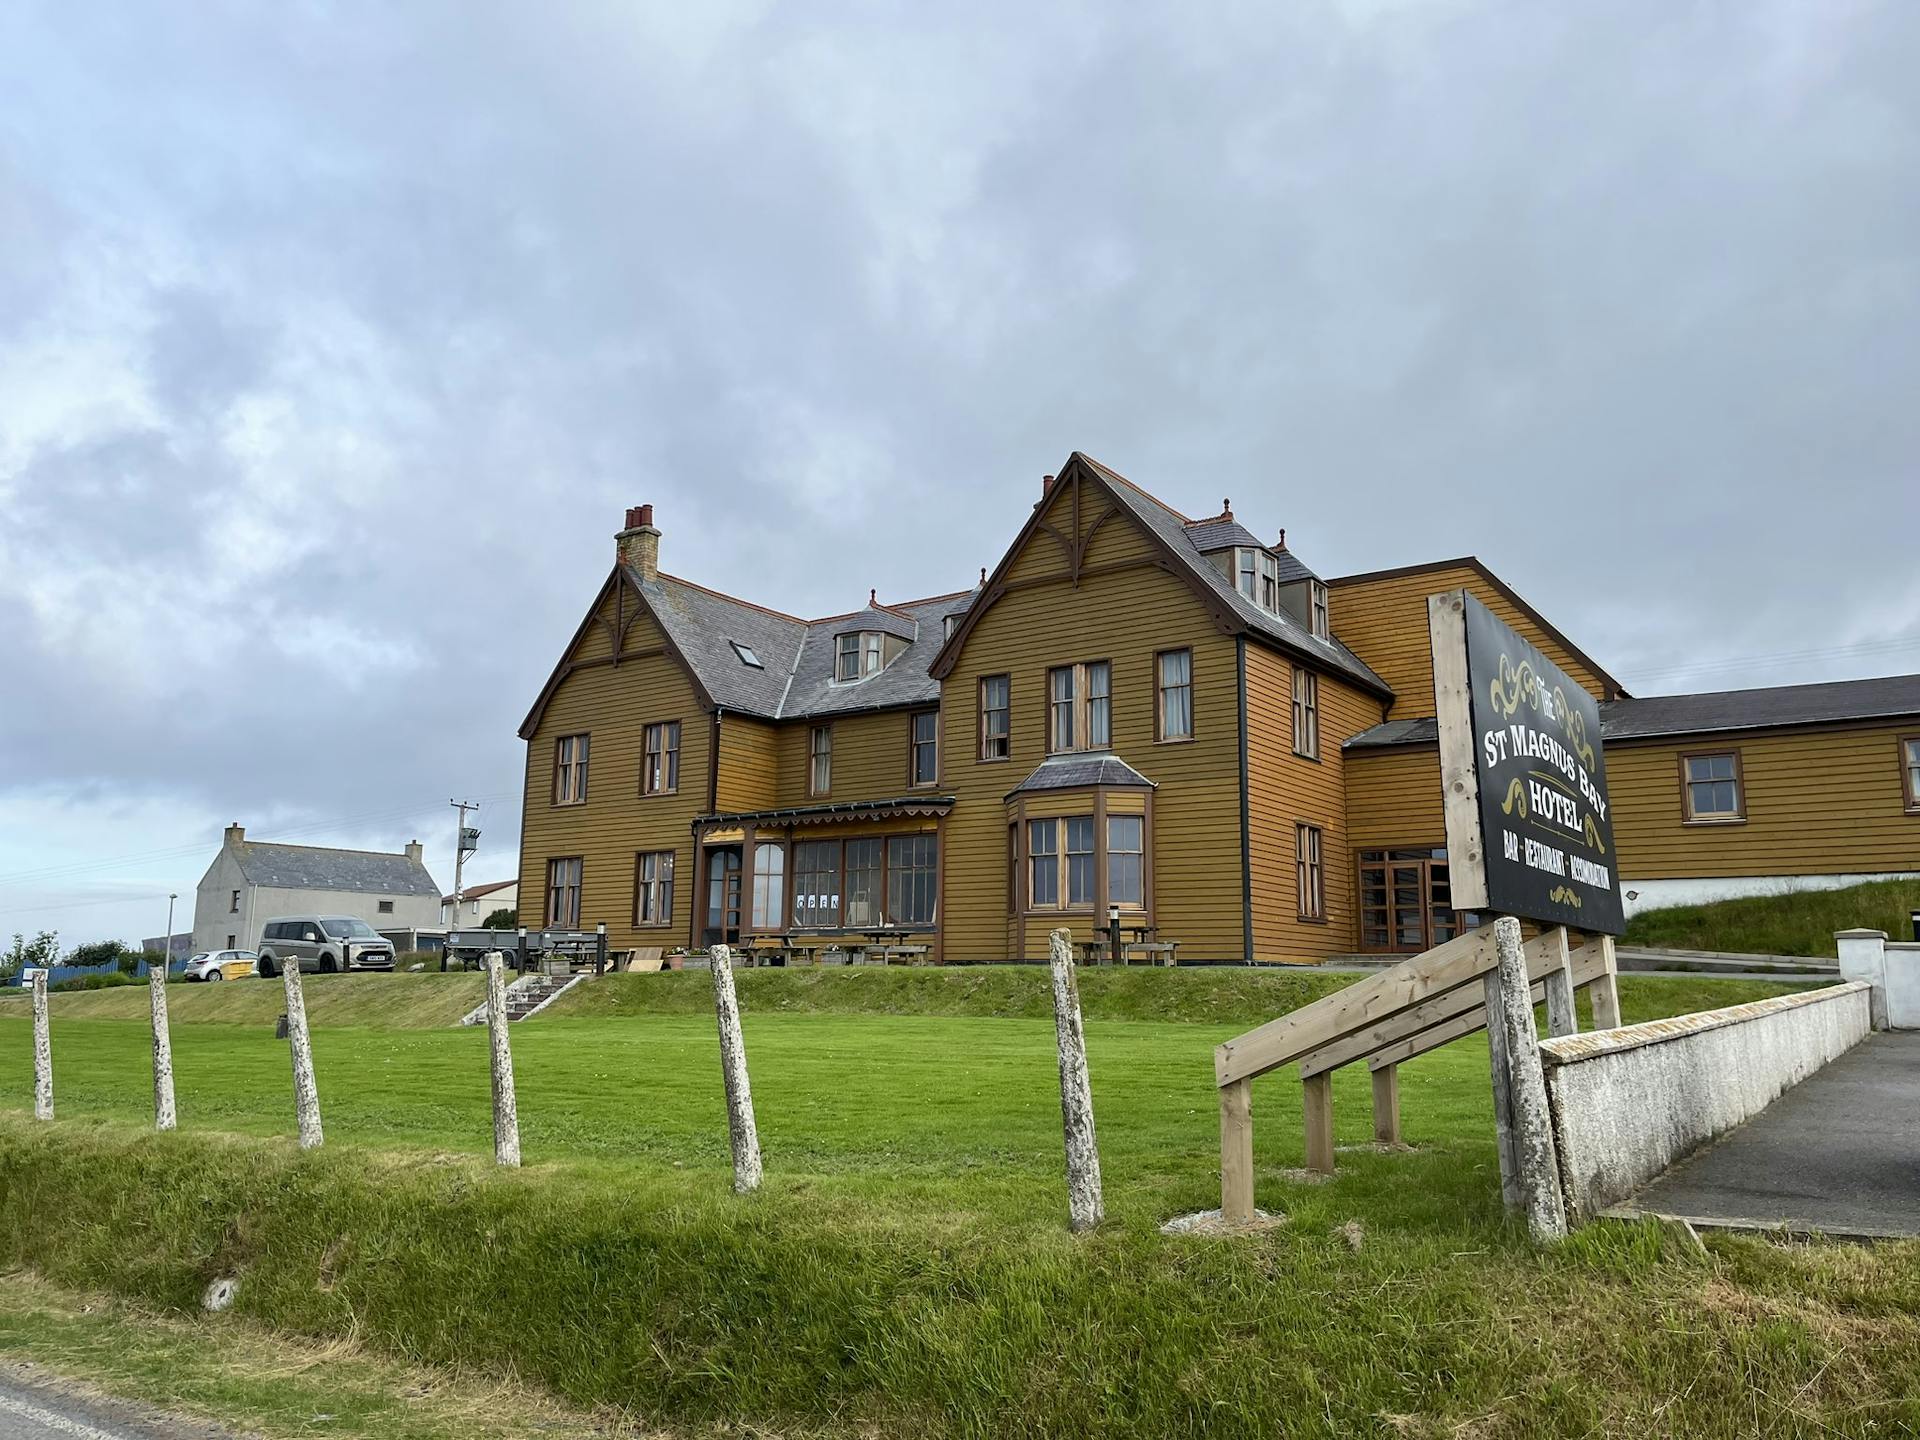 <p>St Magnus Bay Hotel is a family-run hotel located in Hillswick, Shetland. It offers cosy and comfortable rooms with sea views, free Wi-Fi, and a restaurant serving local cuisine. The hotel has a history of hosting famous guests, such as the poet W. H. Auden and the playwright Christopher Isherwood. </p><p><br></p><p>It is also a great base for exploring the scenic and wildlife-rich surroundings of St Magnus Bay, such as the Ness of Hillswick Circular Walk and the Tangwick Haa Museum. </p>